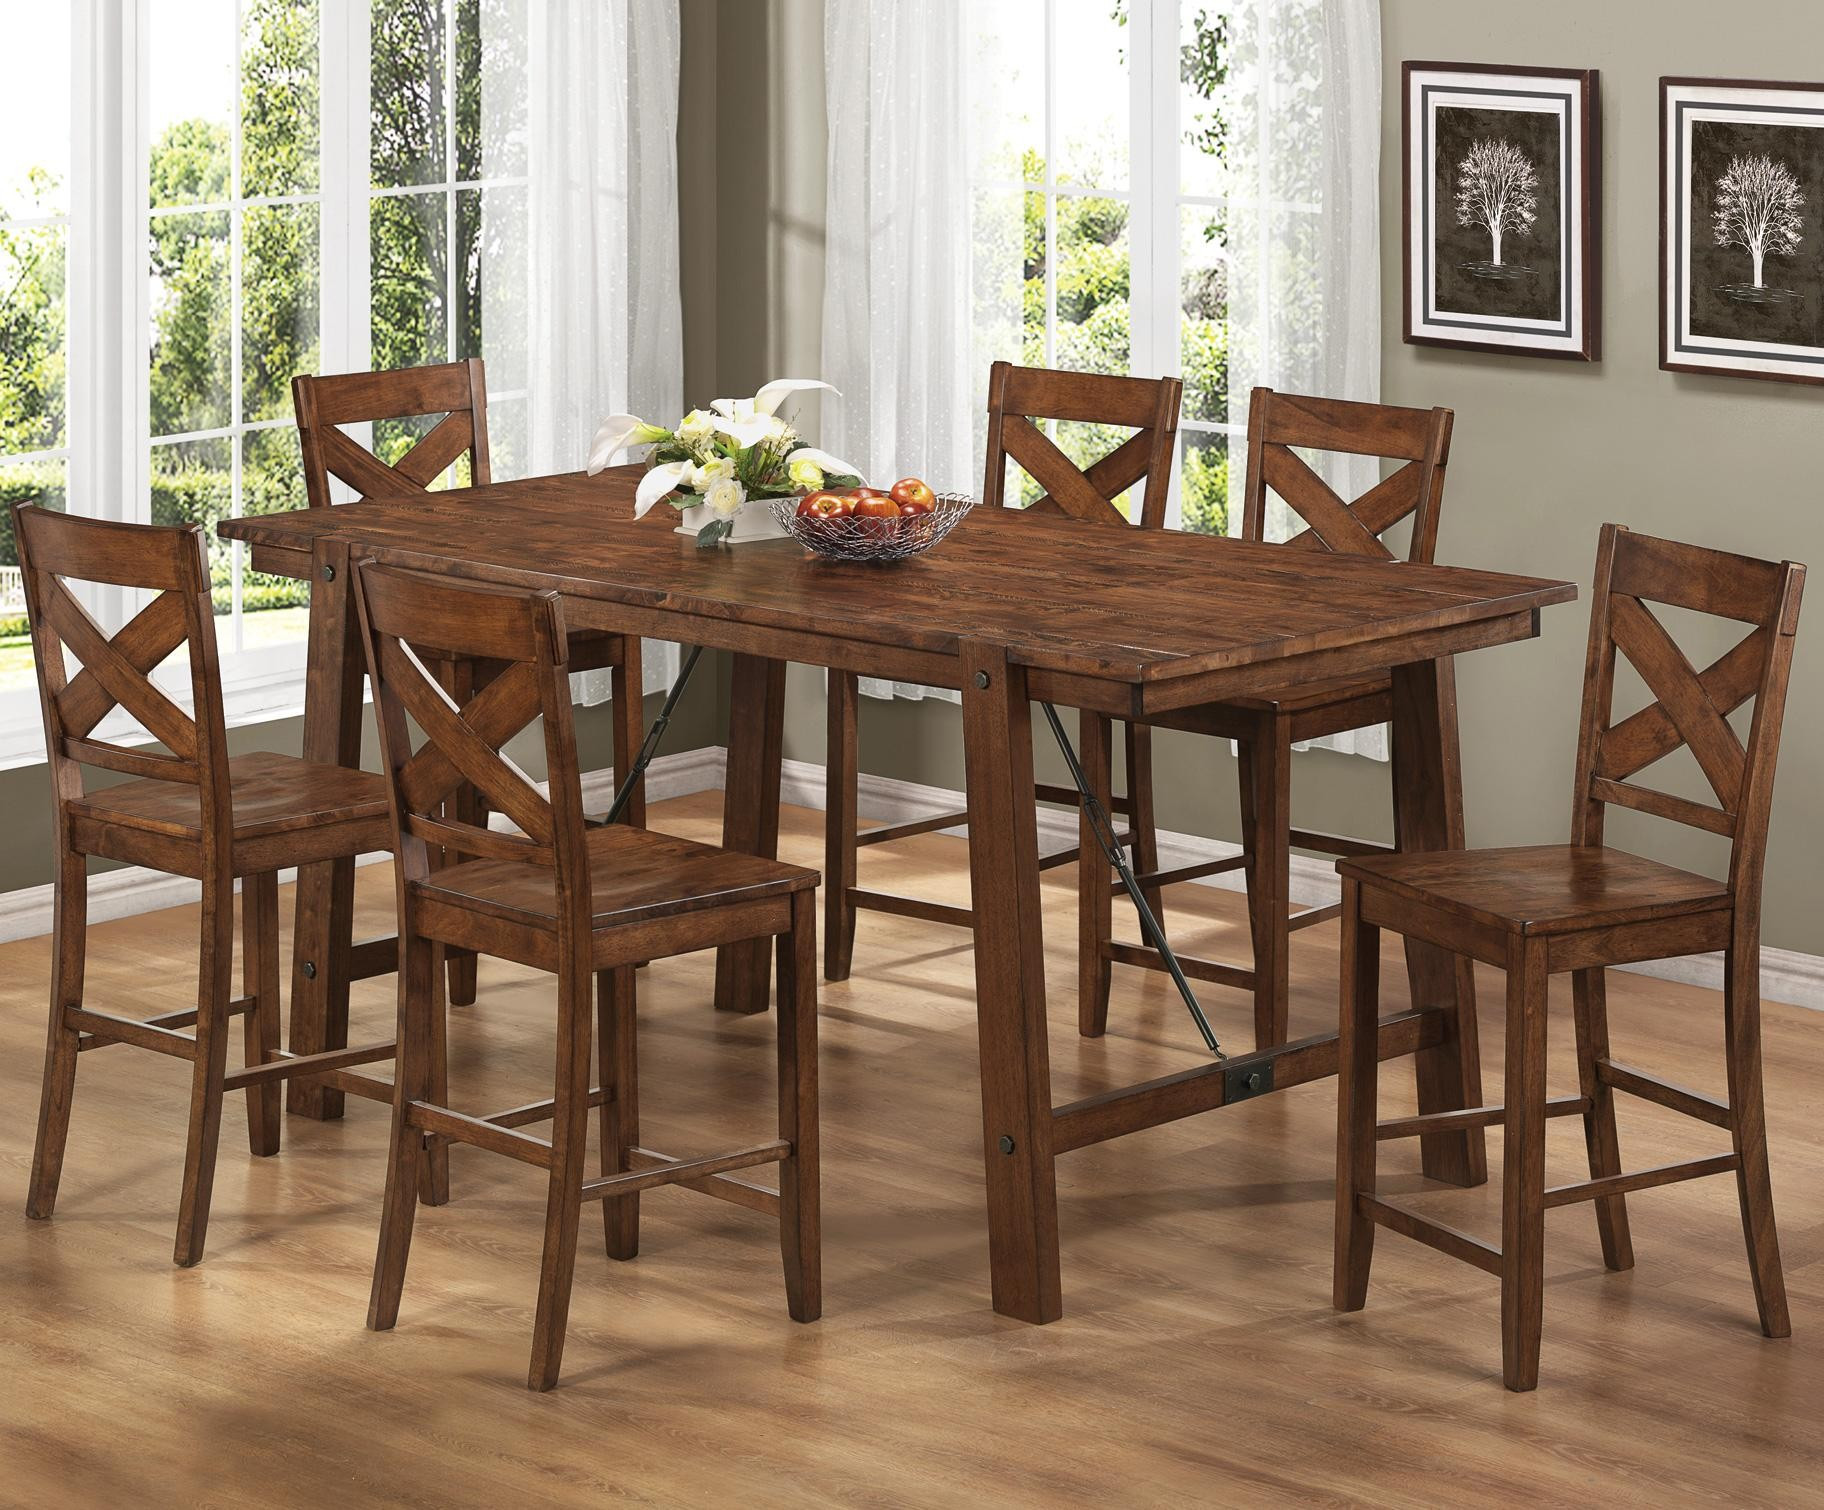 Small High Top Kitchen Table
 High Top Kitchen Table Sets – HomesFeed